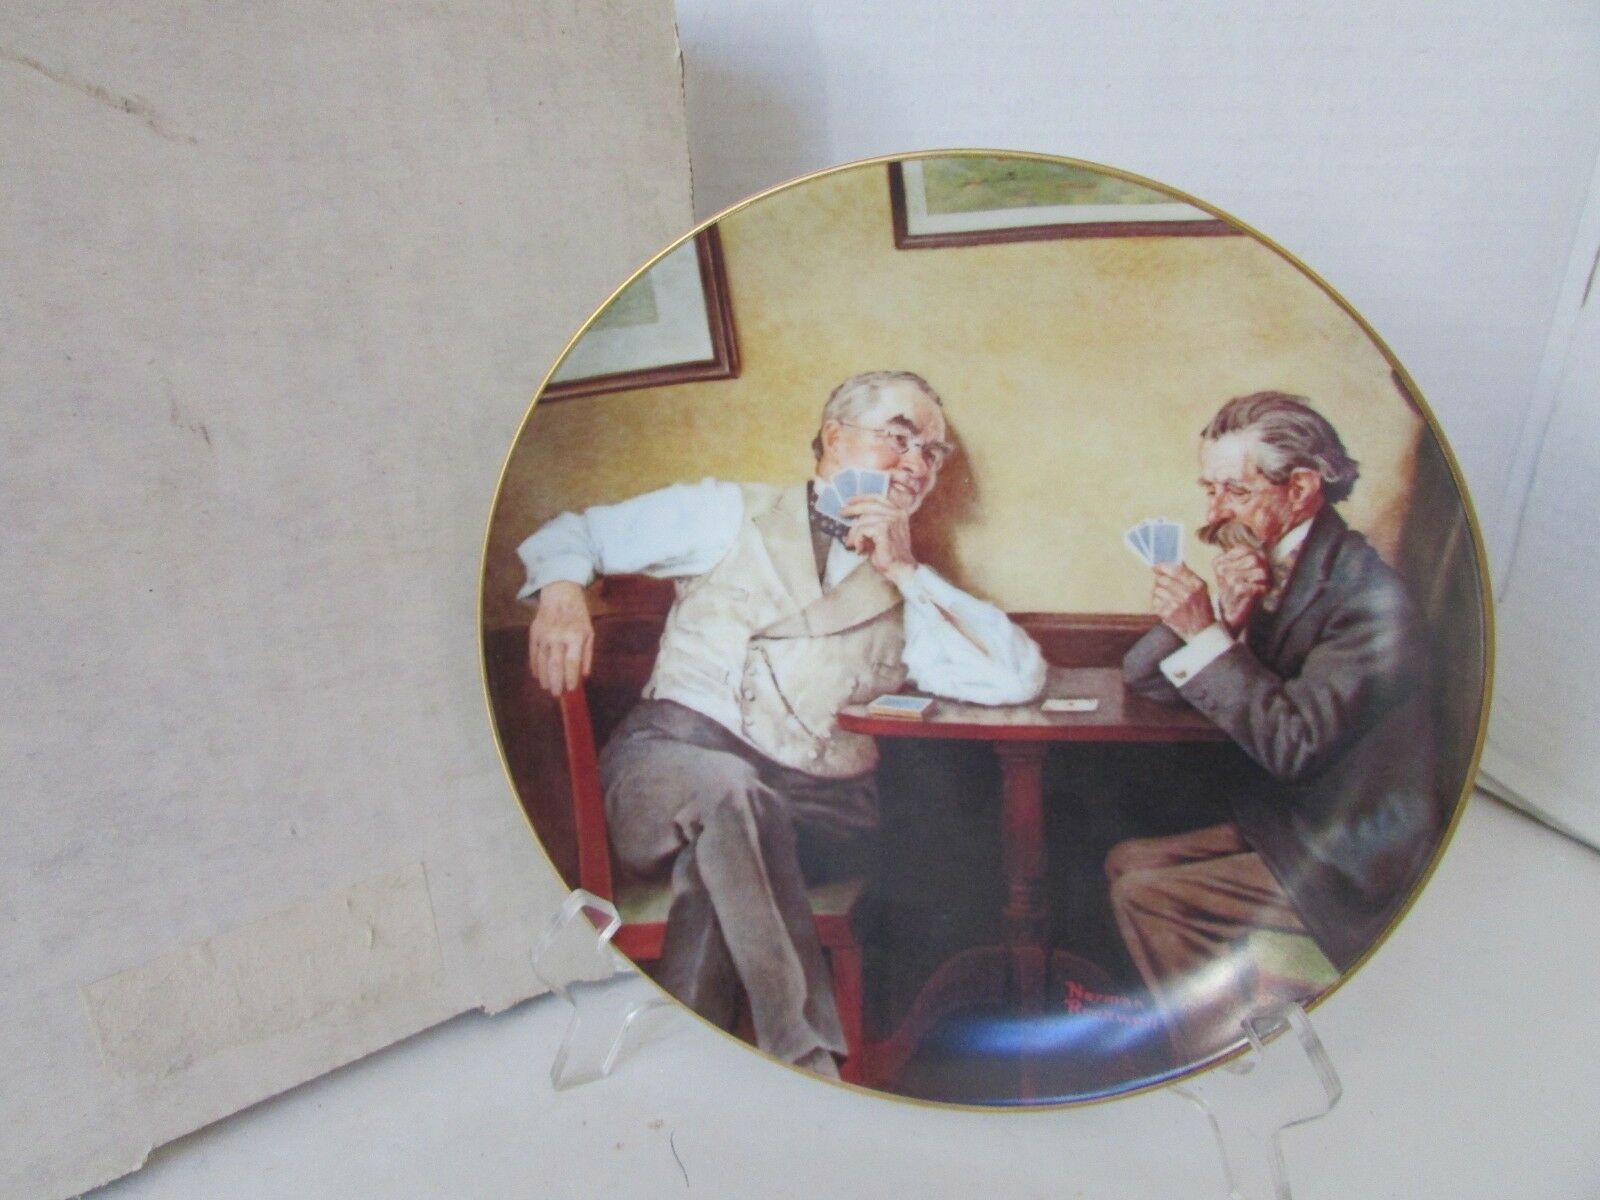 KNOWLES COLLECTOR PLATE BEST FRIENDS 4TH ROCKWELL'S GOLDEN MOMENTS BOXED 10799 - $4.90